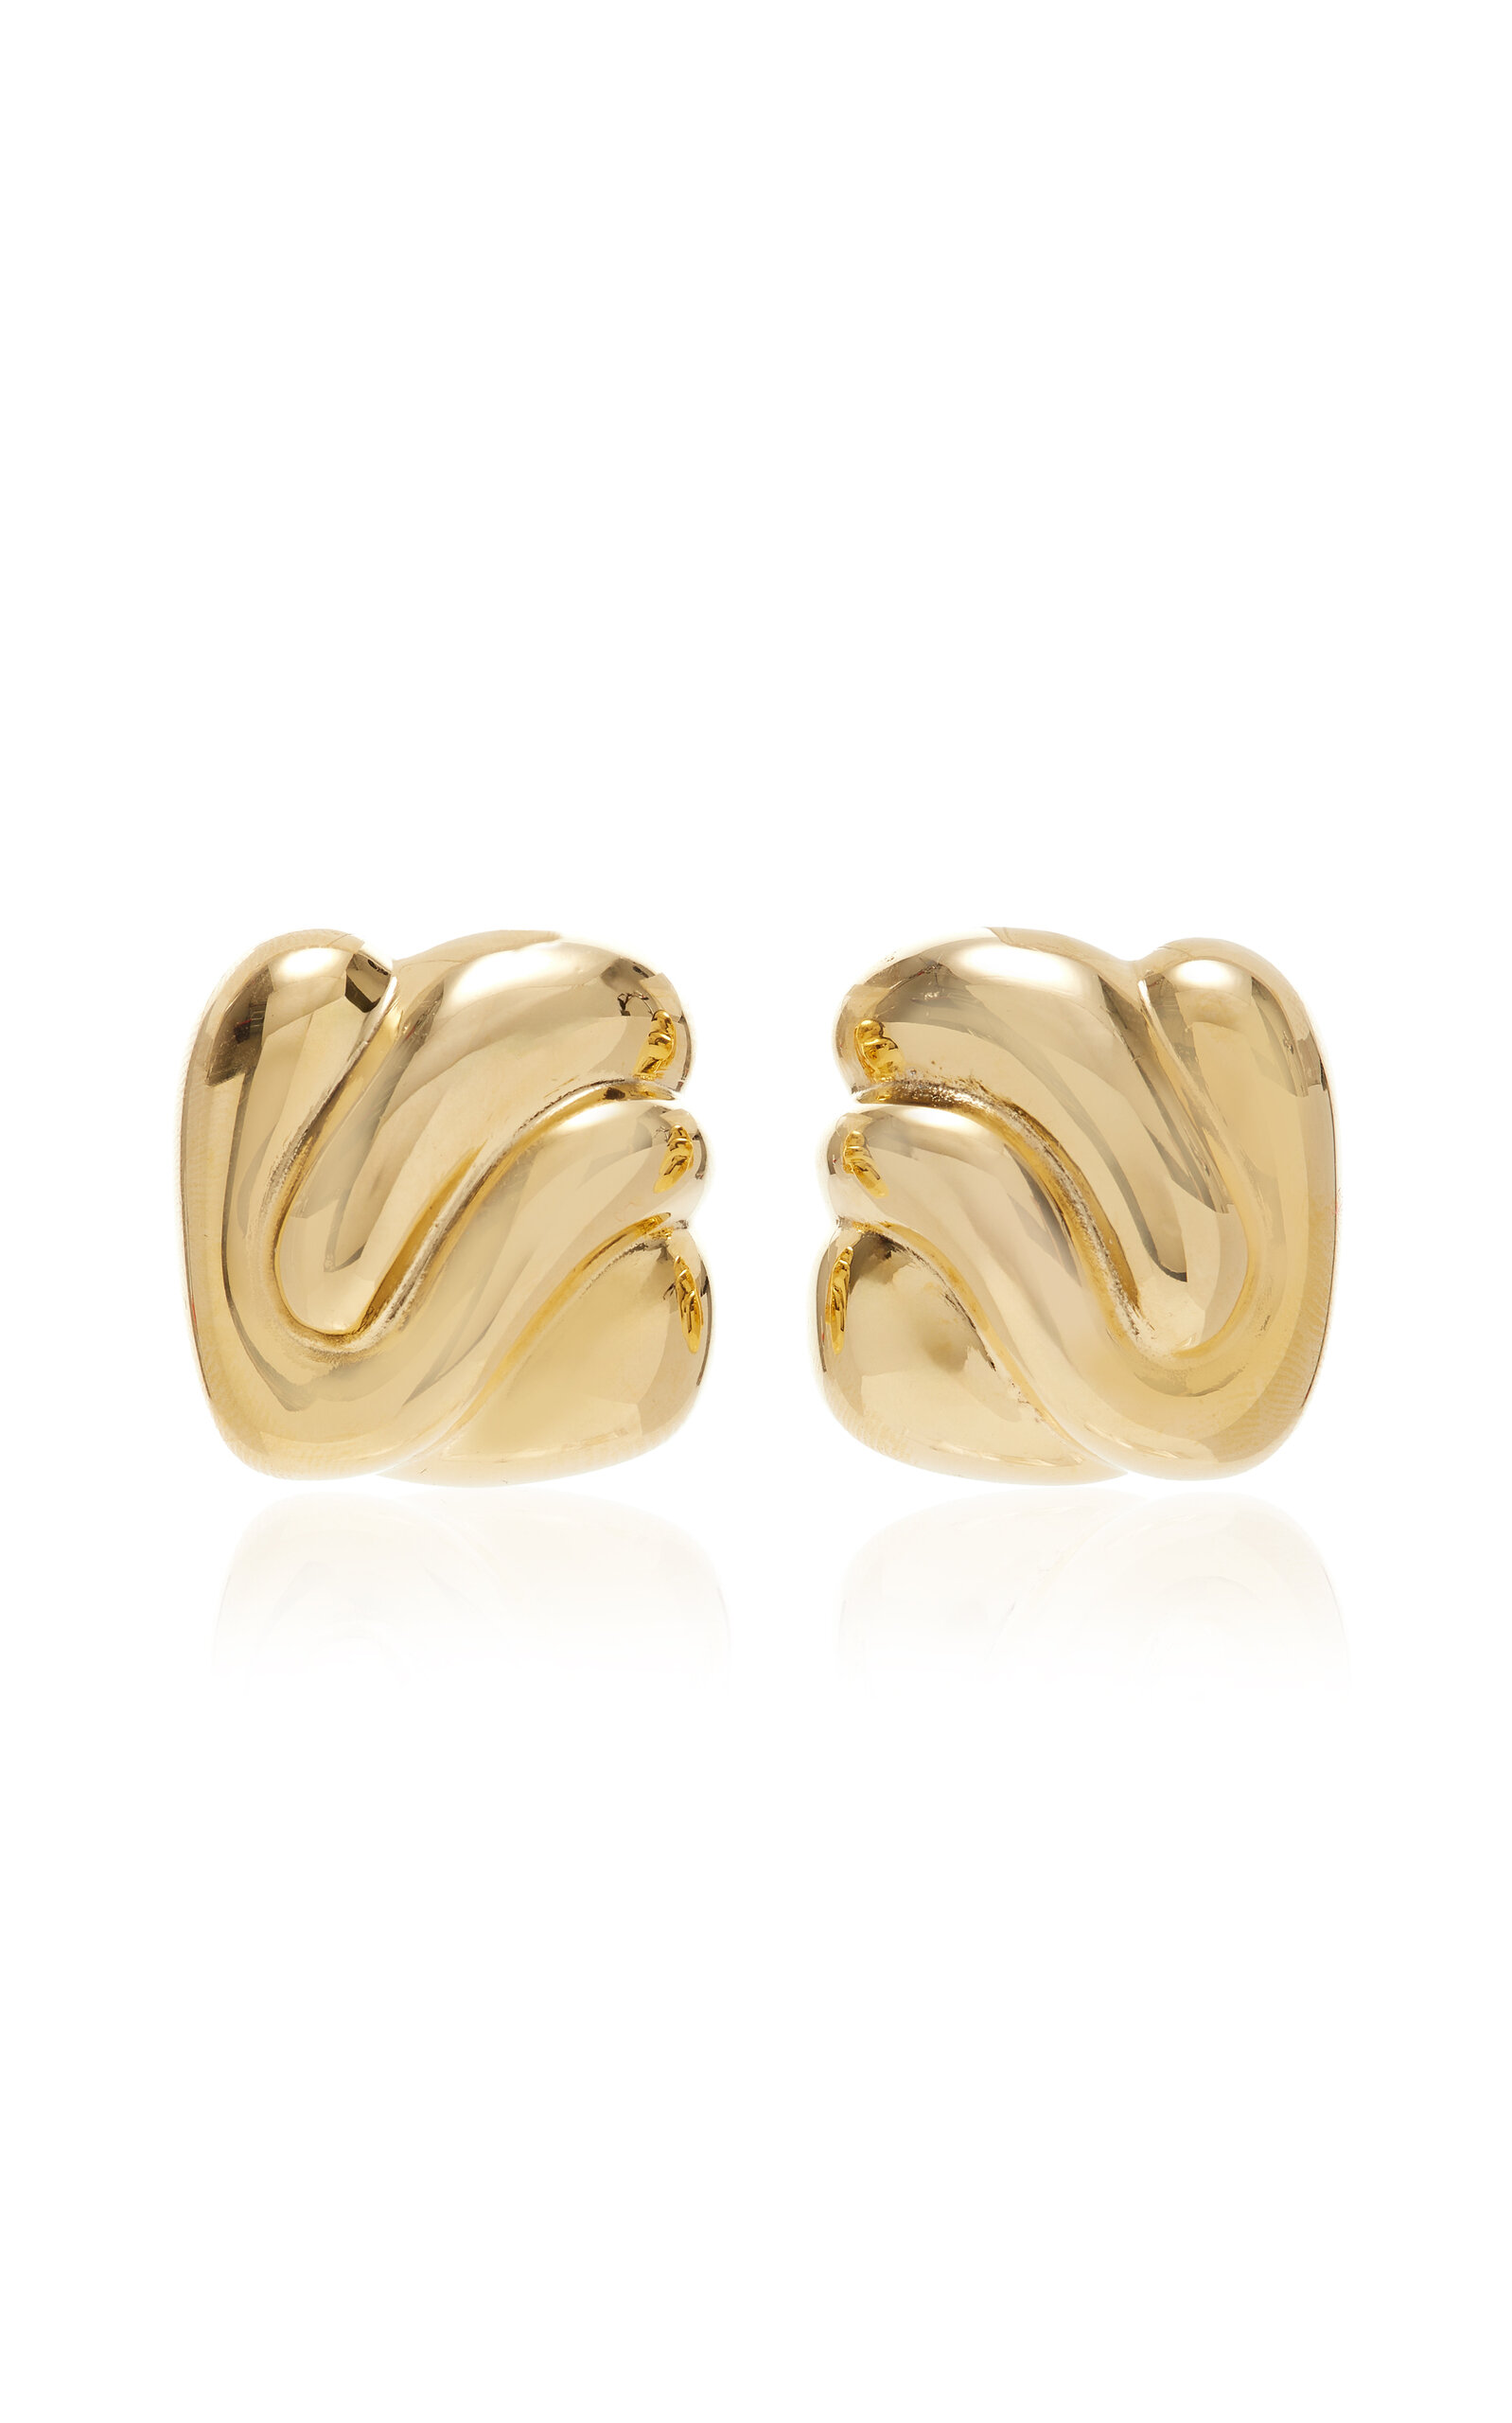 Ben-amun Exclusive 24k Gold-plated Earrings